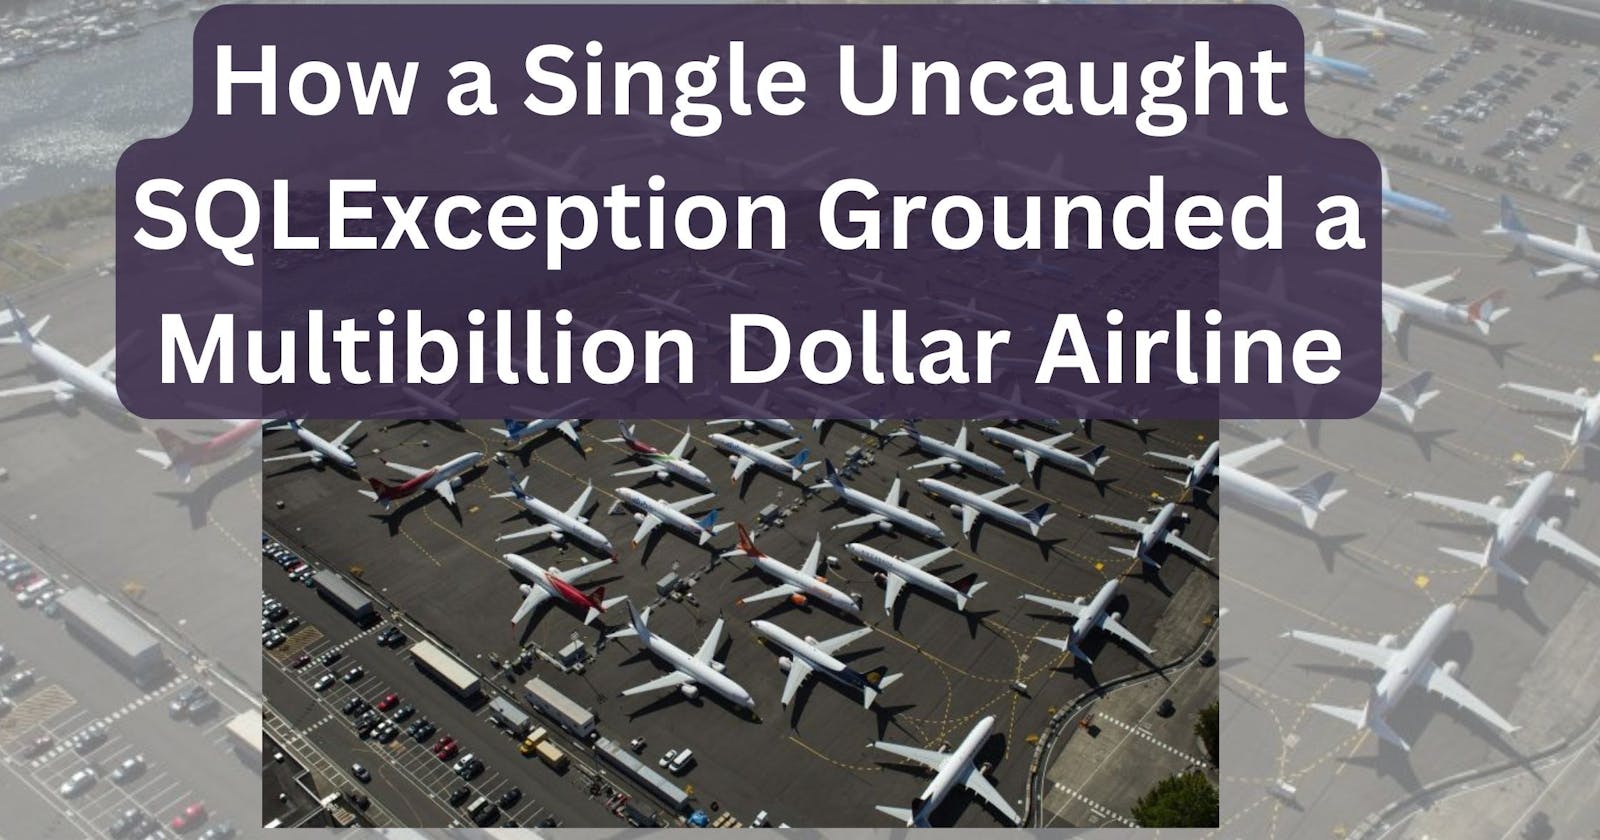 How a Single Uncaught SQLException Grounded a Multibillion Dollar Airline?